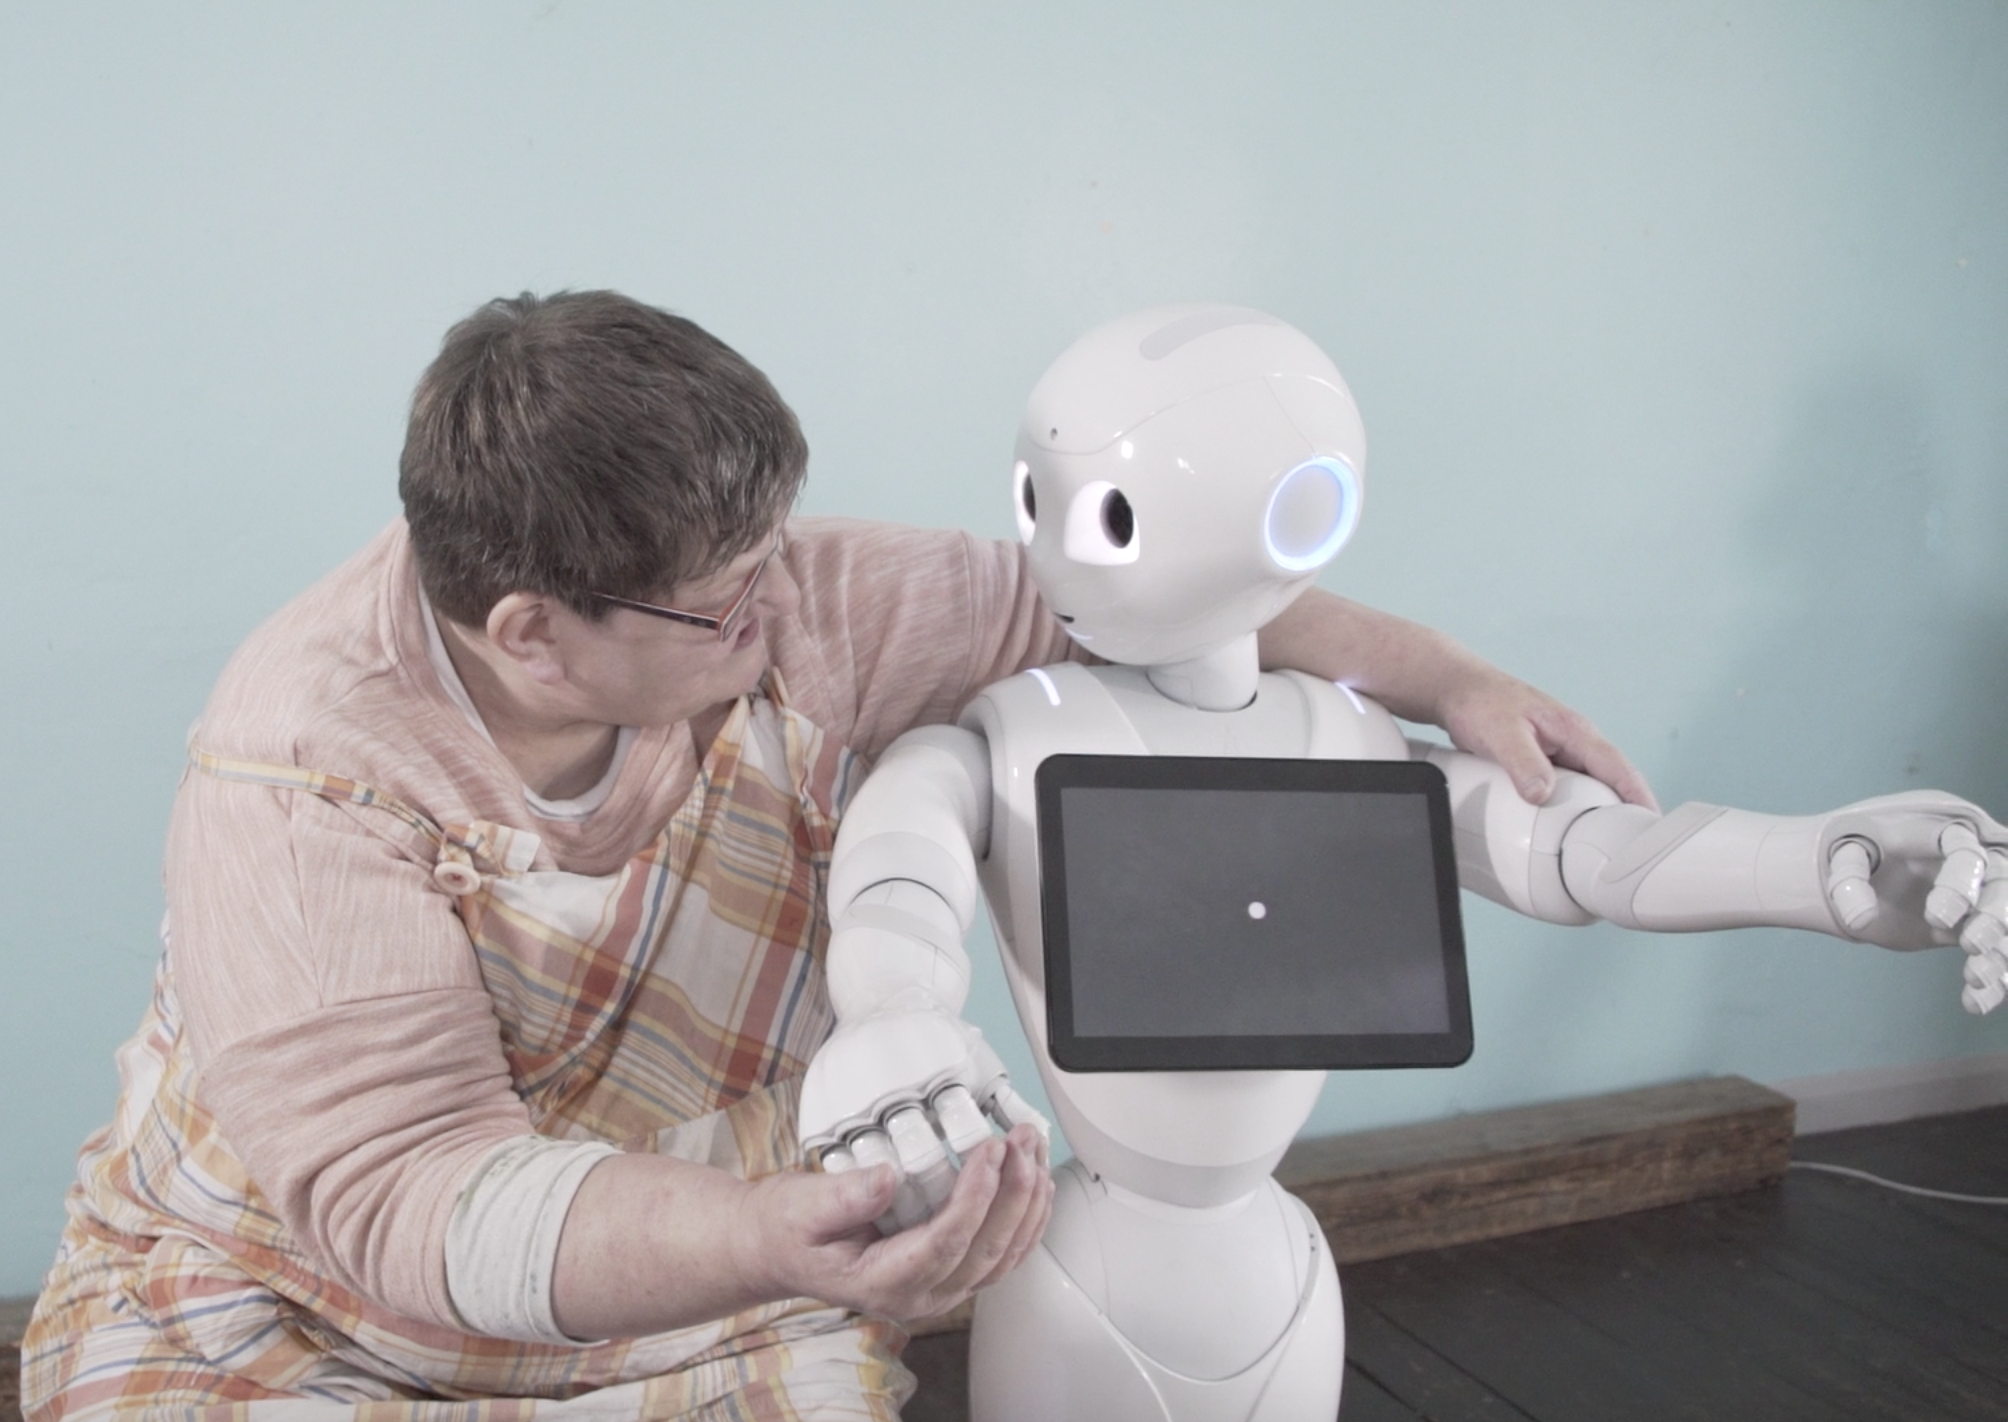 a woman puts her arms around a white robot figure in the pose of a hug. The robot has its head turned to look at her face. The robot has a tablet screen across its chest